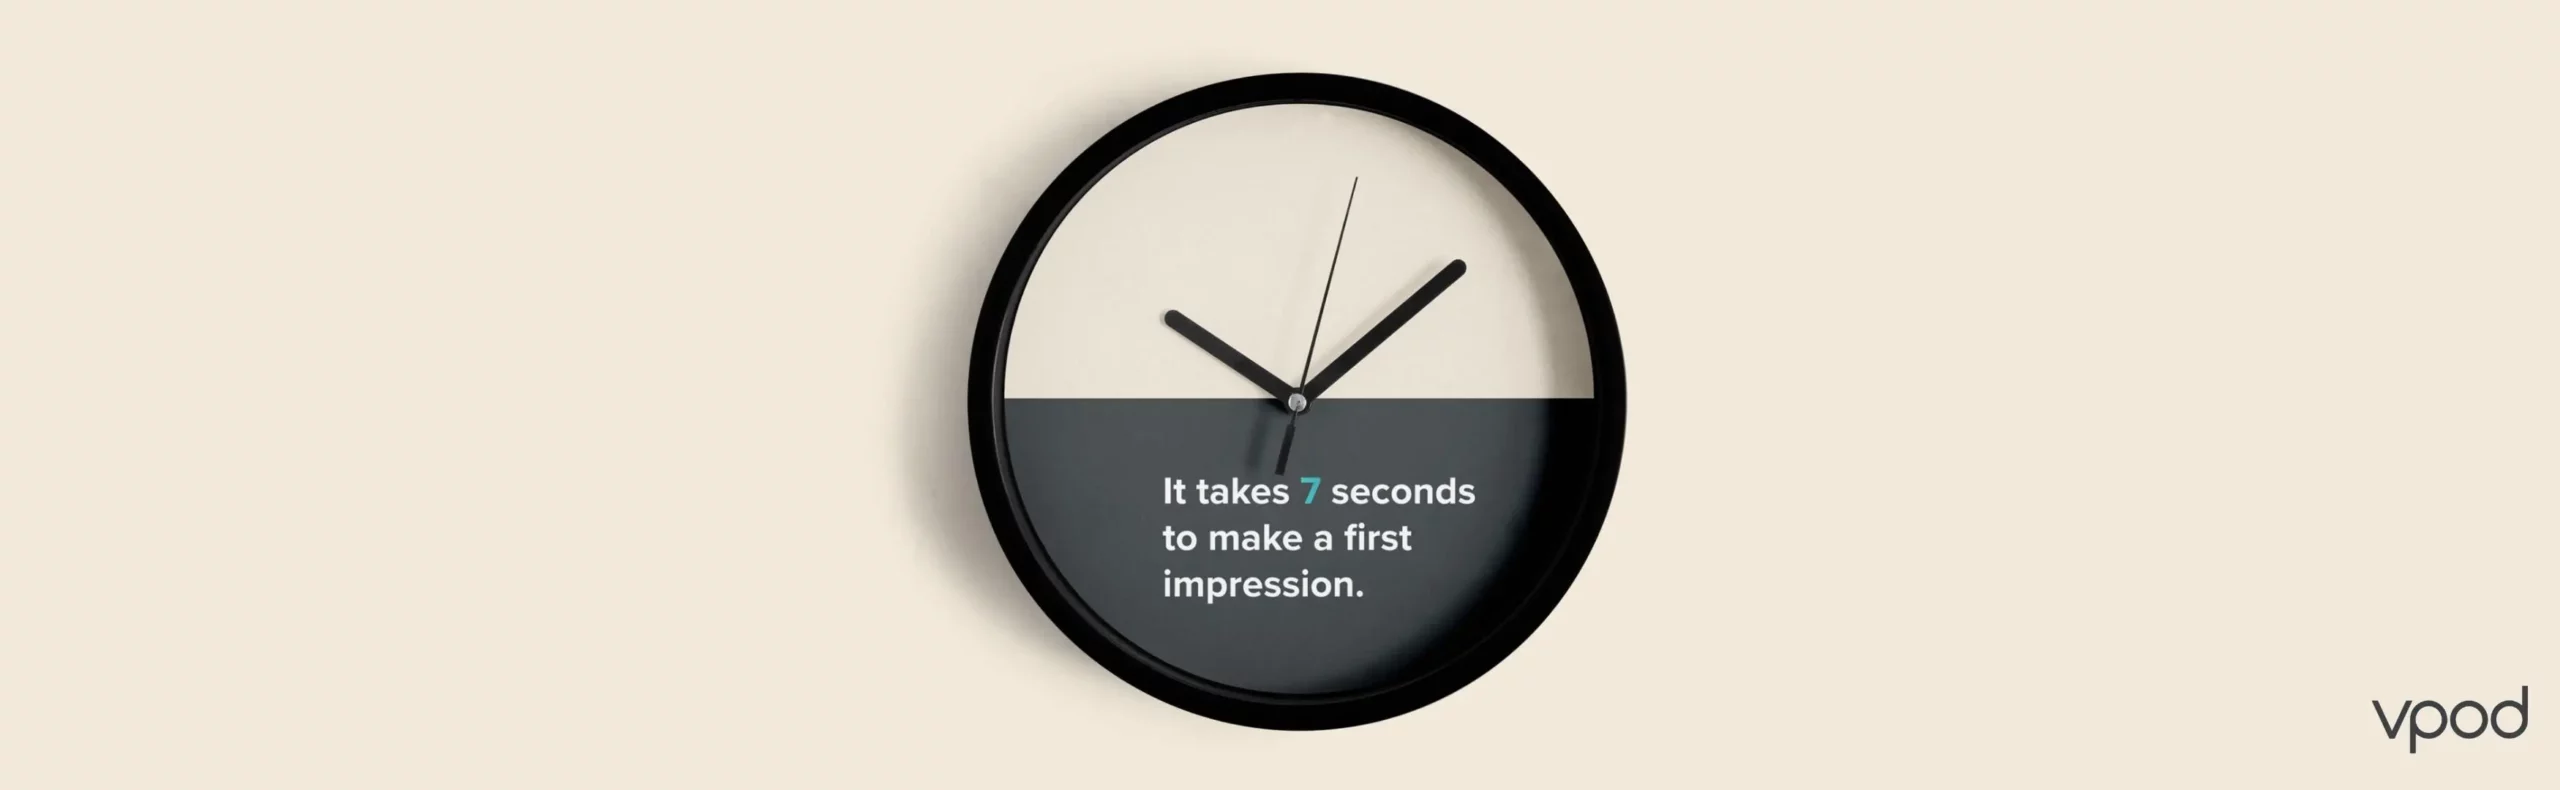 7-second-to-make-first-impression